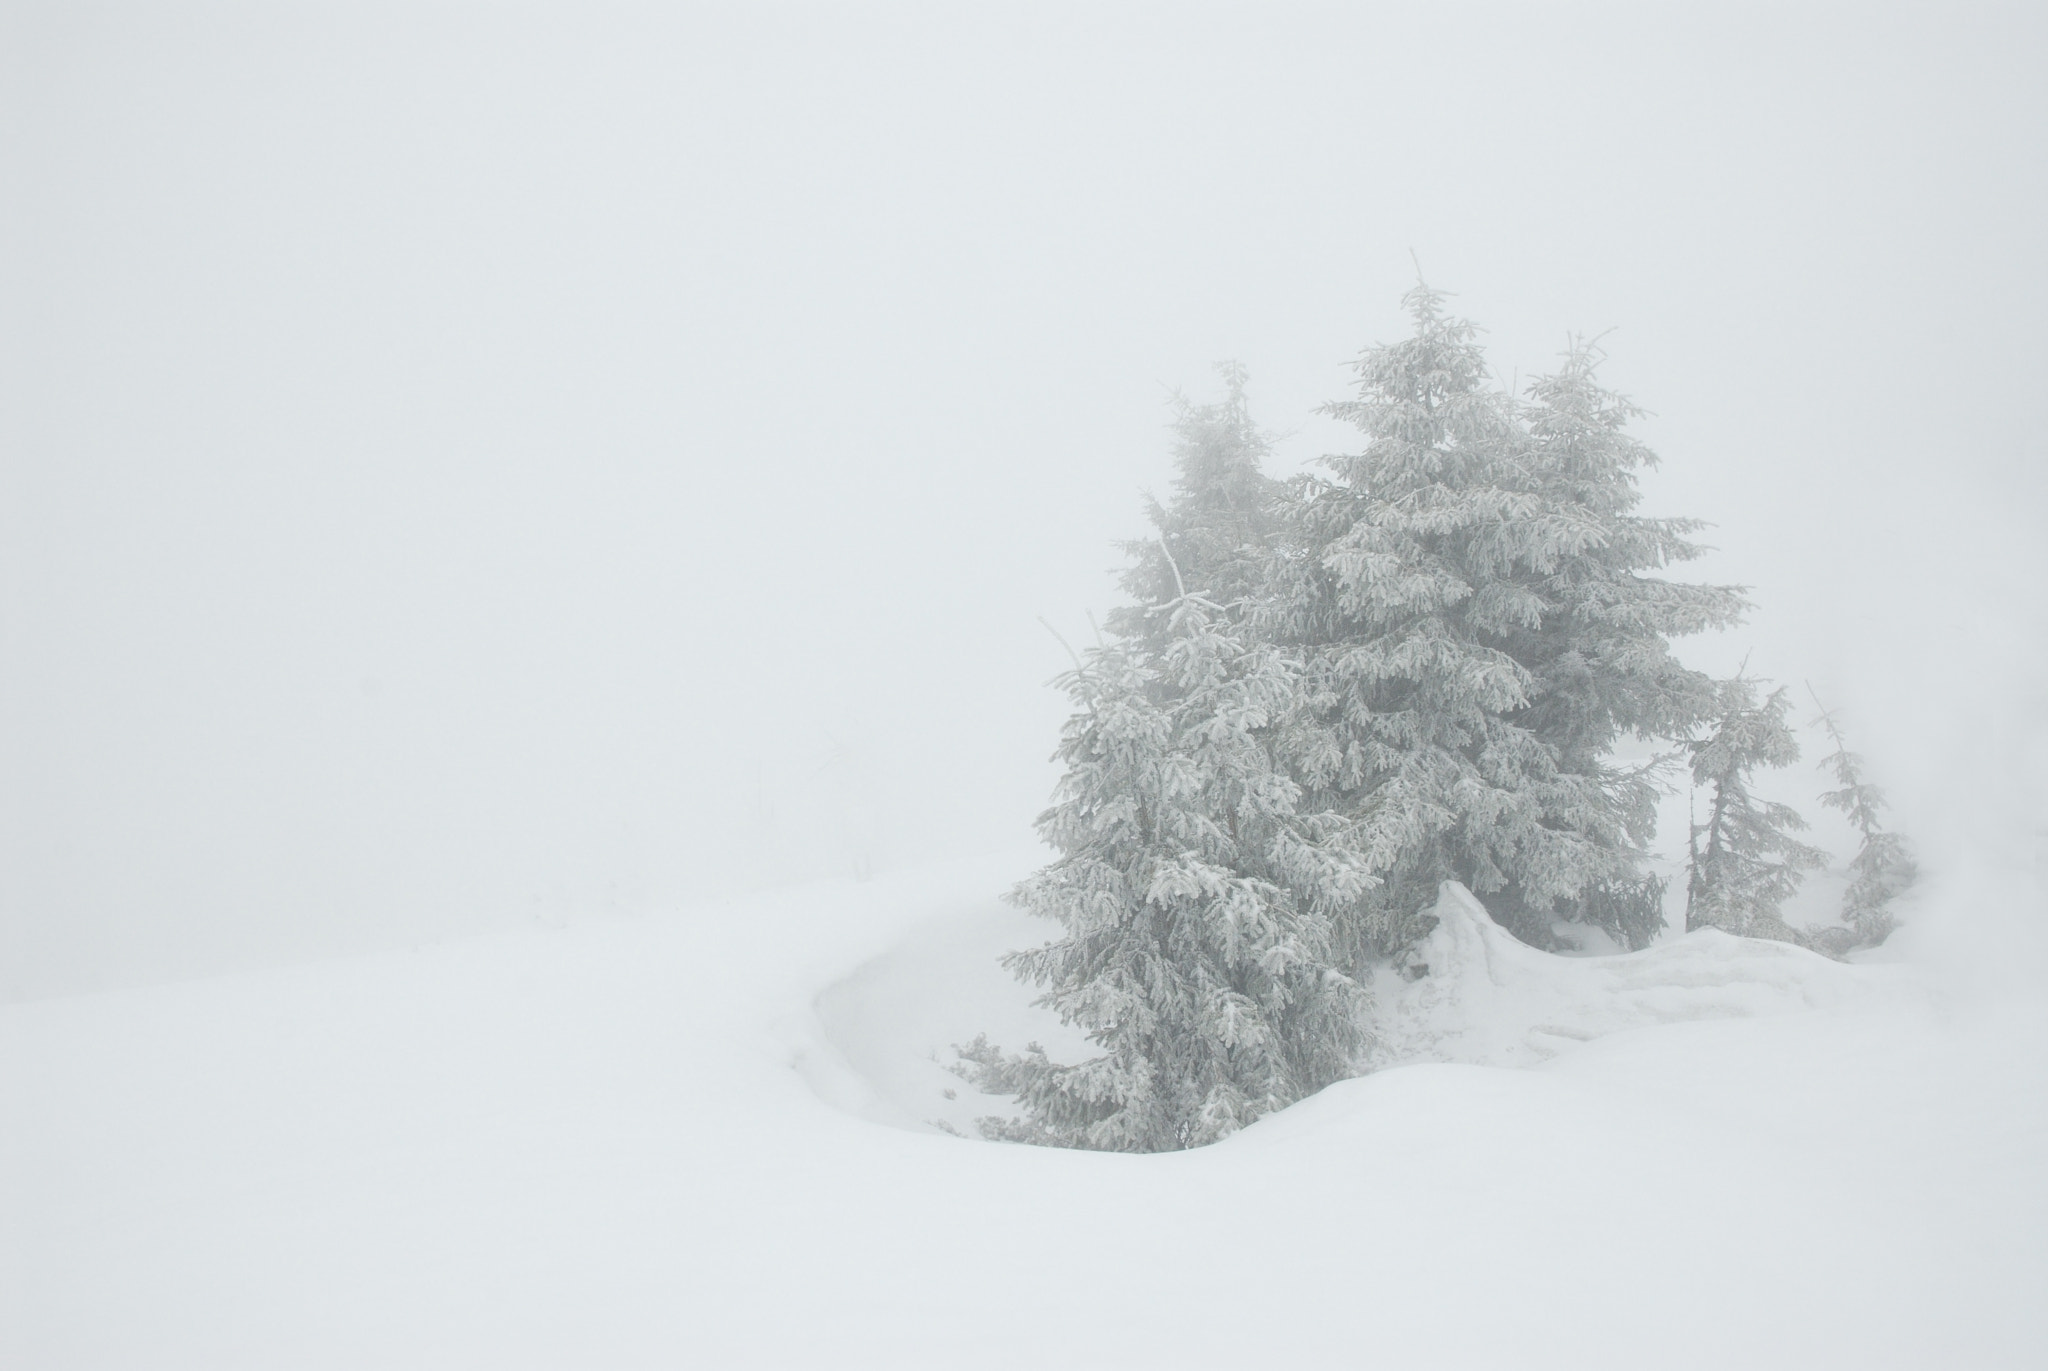 Nikon D200 sample photo. Spruce in snow storm photography